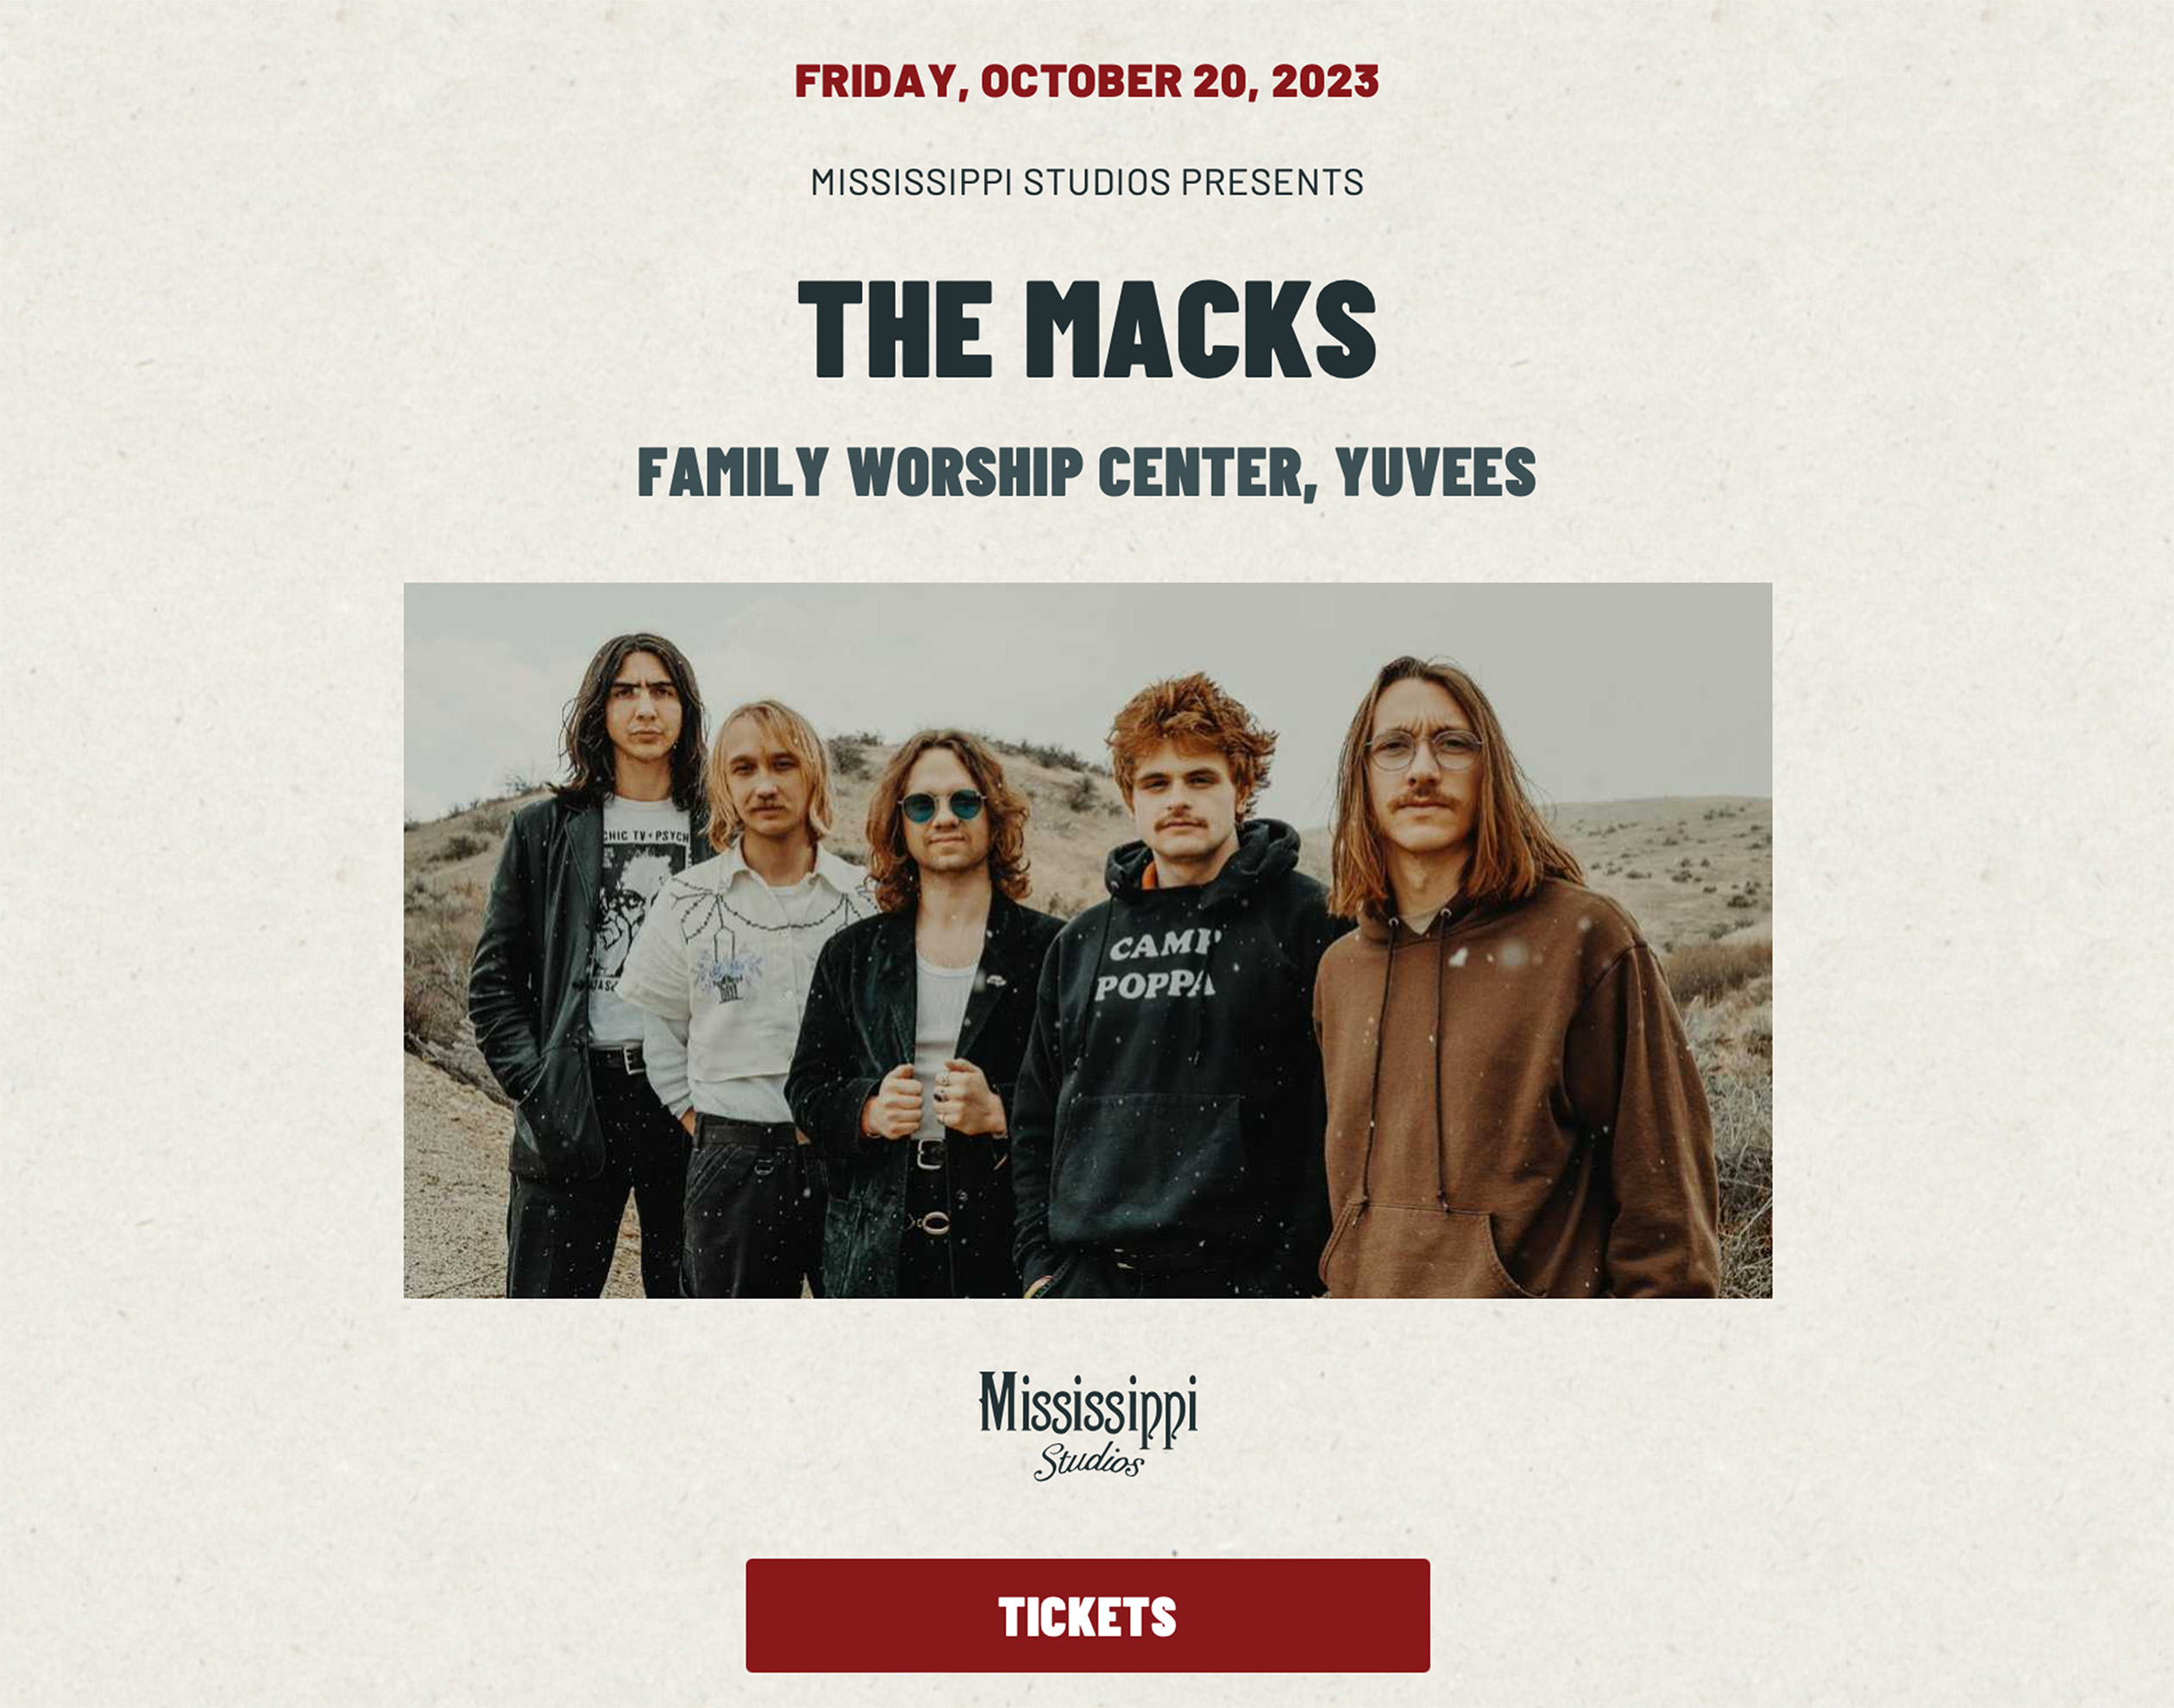 The Macks are headlining Mississippi Studios on 10/20/23 in Portland, Oregon with Yuvees and Family Worship Center.